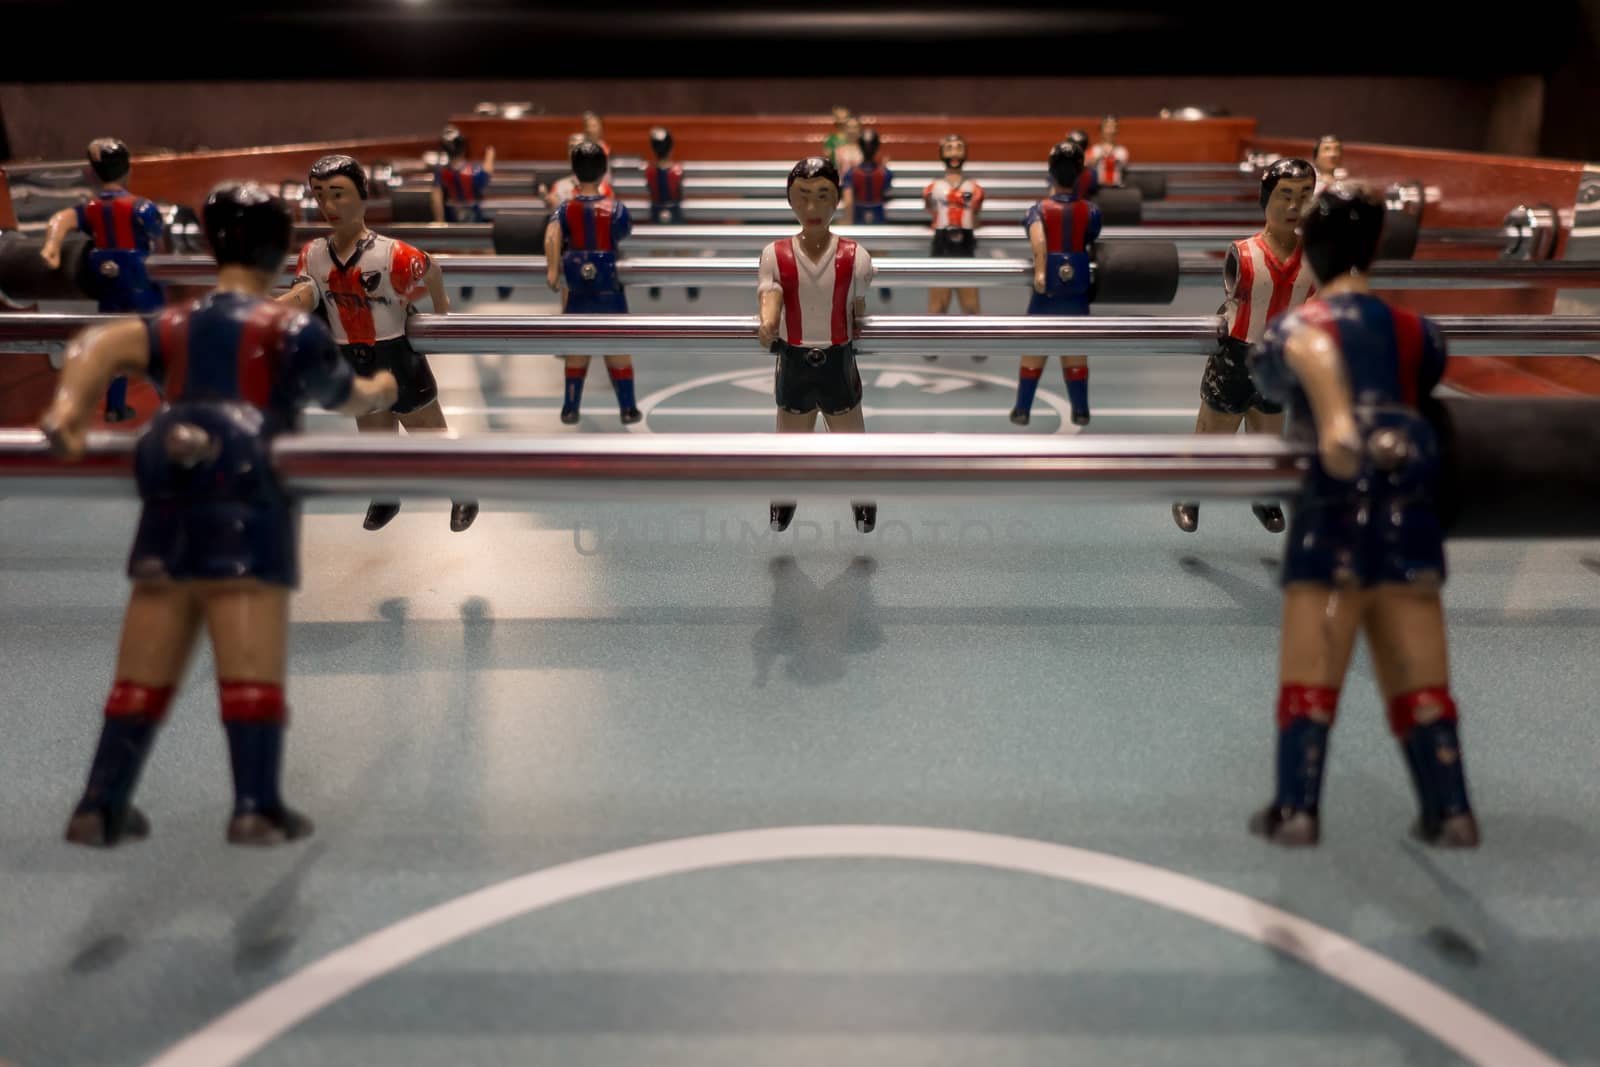 foosball players pieces in very close view by jmagfoto